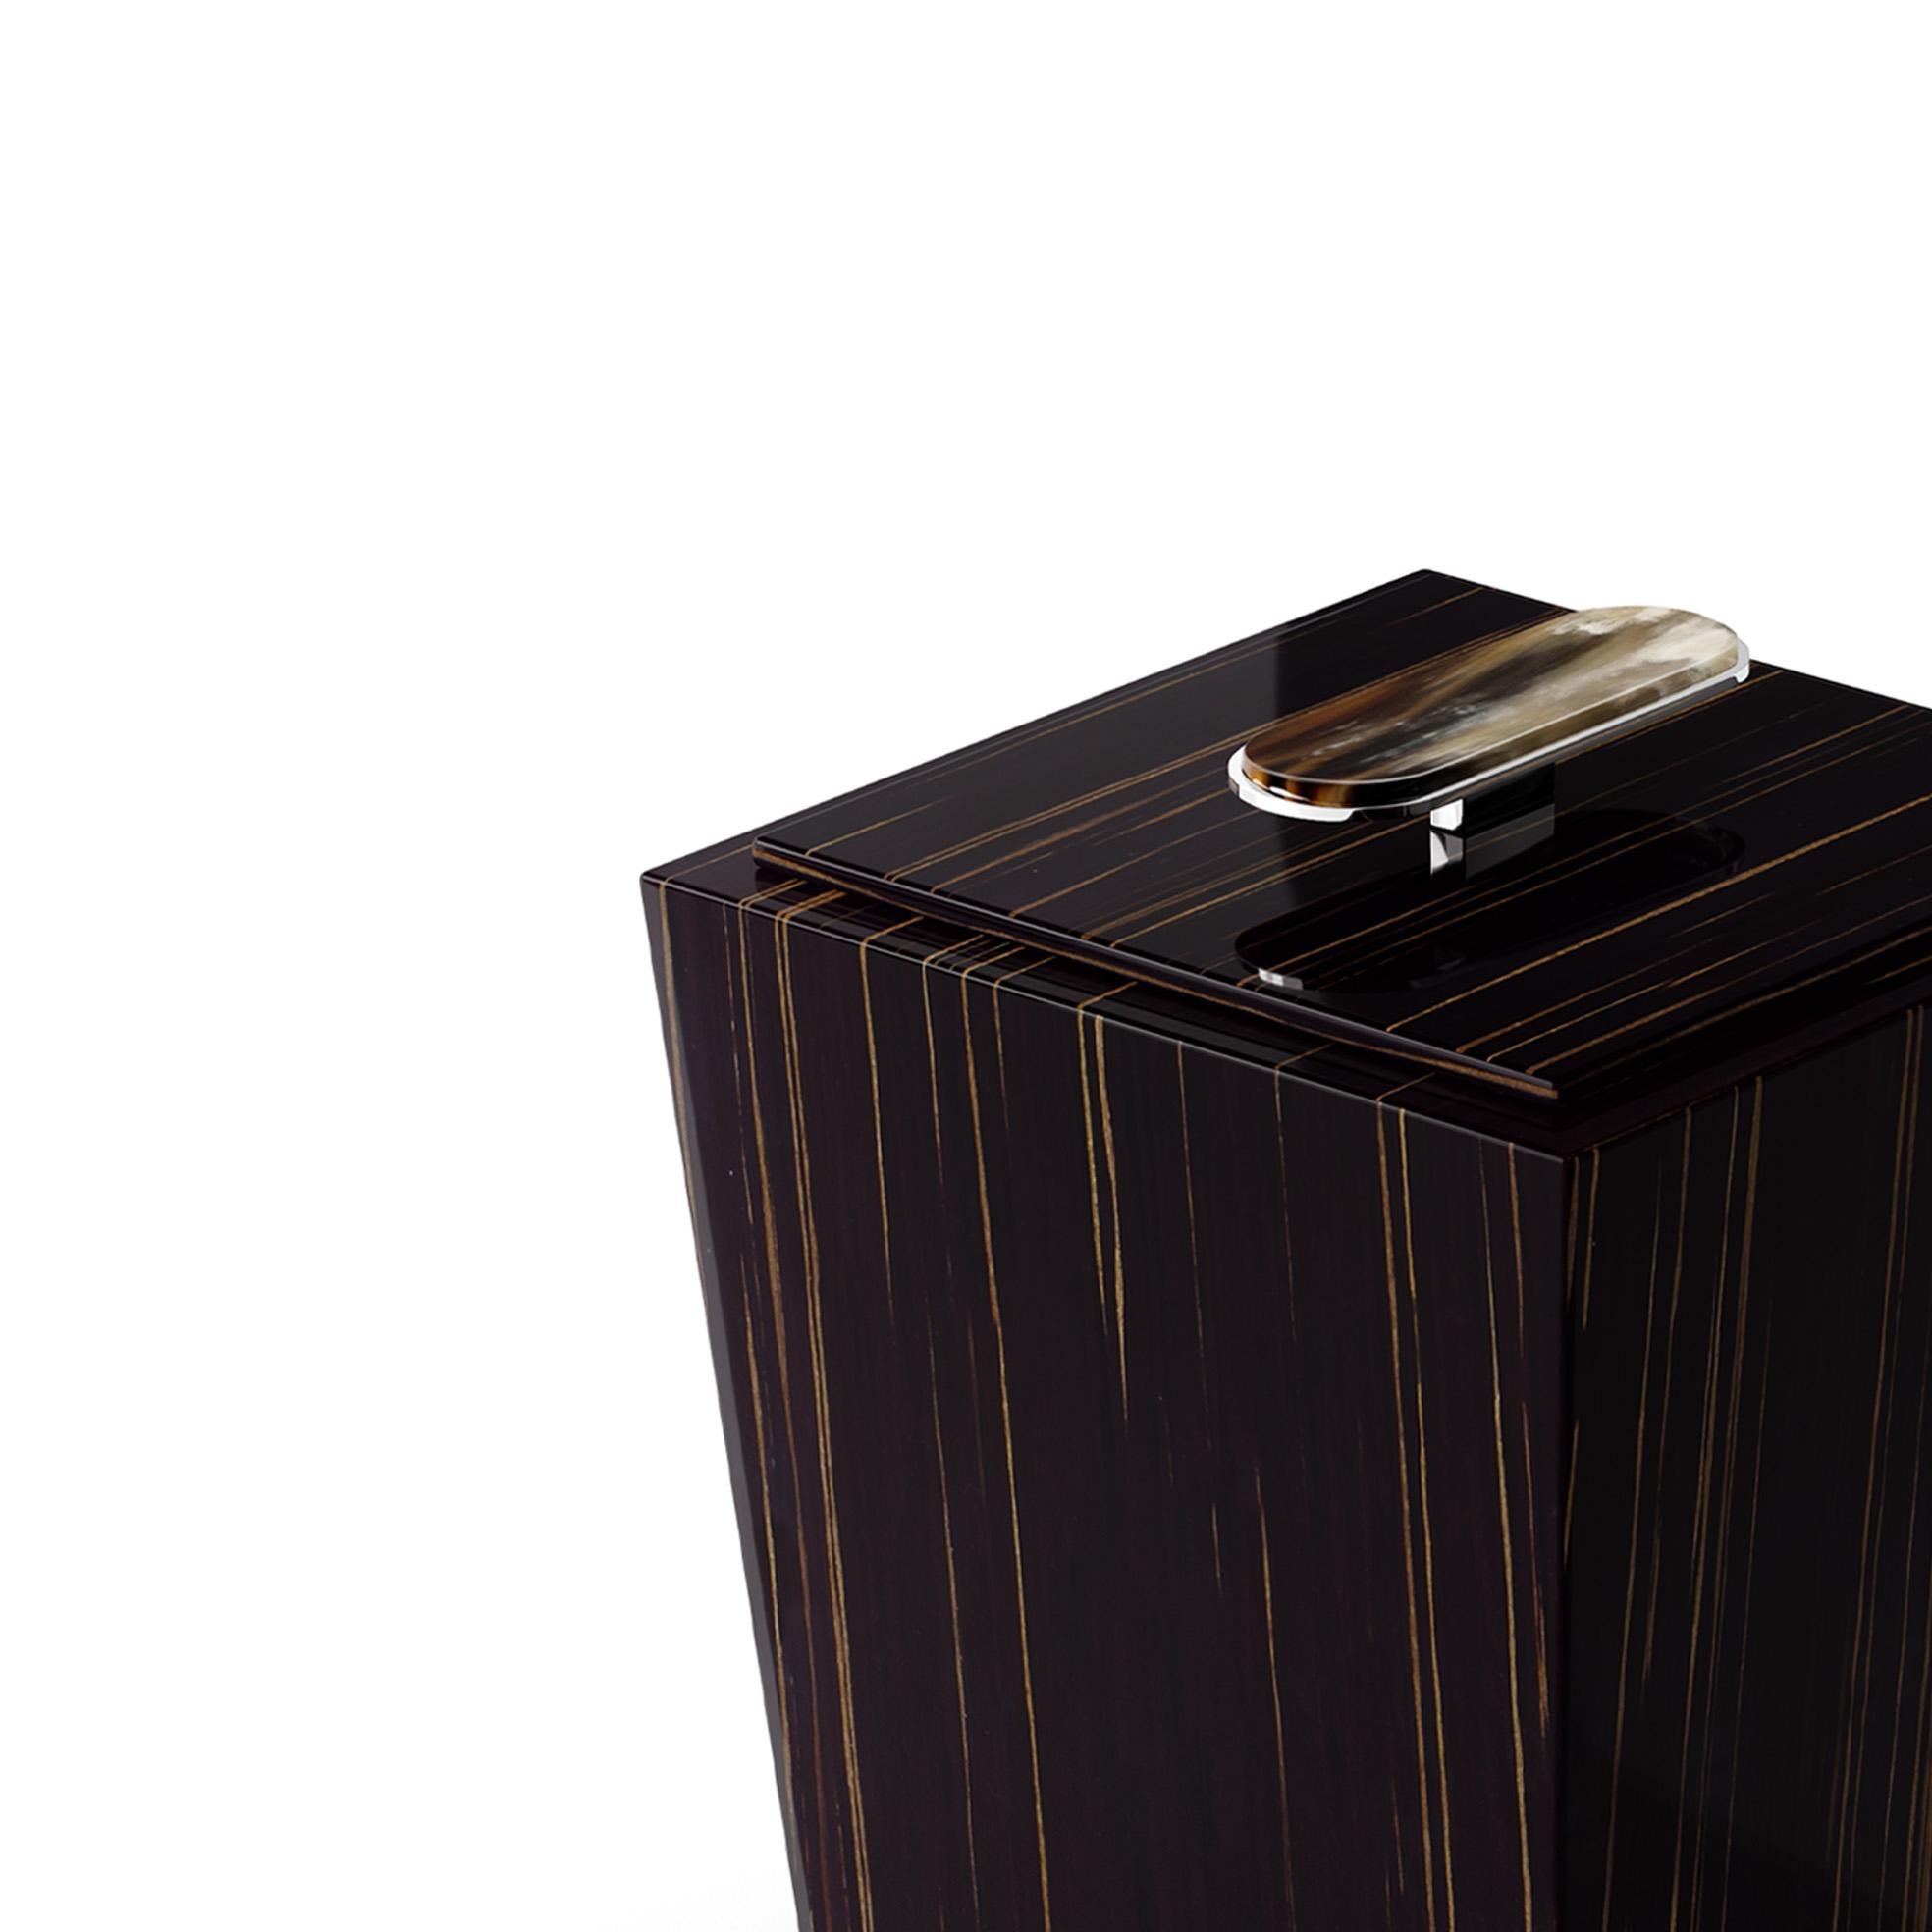 The Bicco waste paper basket is a sophisticated and versatile accessory, designed to elevate any bathroom or office space. Fashioned from glossy ebony, Bicco sports a practical lid embellished by an elegant handle in Corno Italiano and chromed